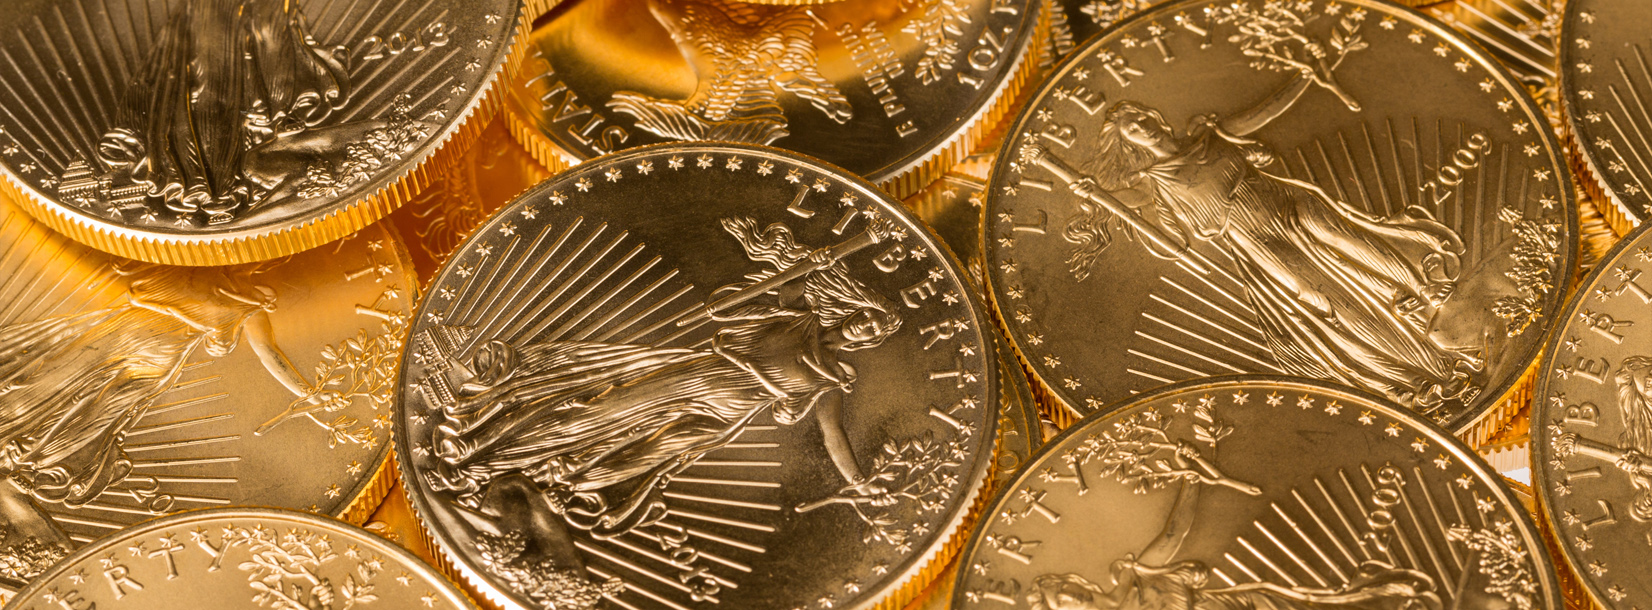 Texas Lawmaker: It’s Time to Protect Gold Depository, Reduce Precious-Metal Taxes